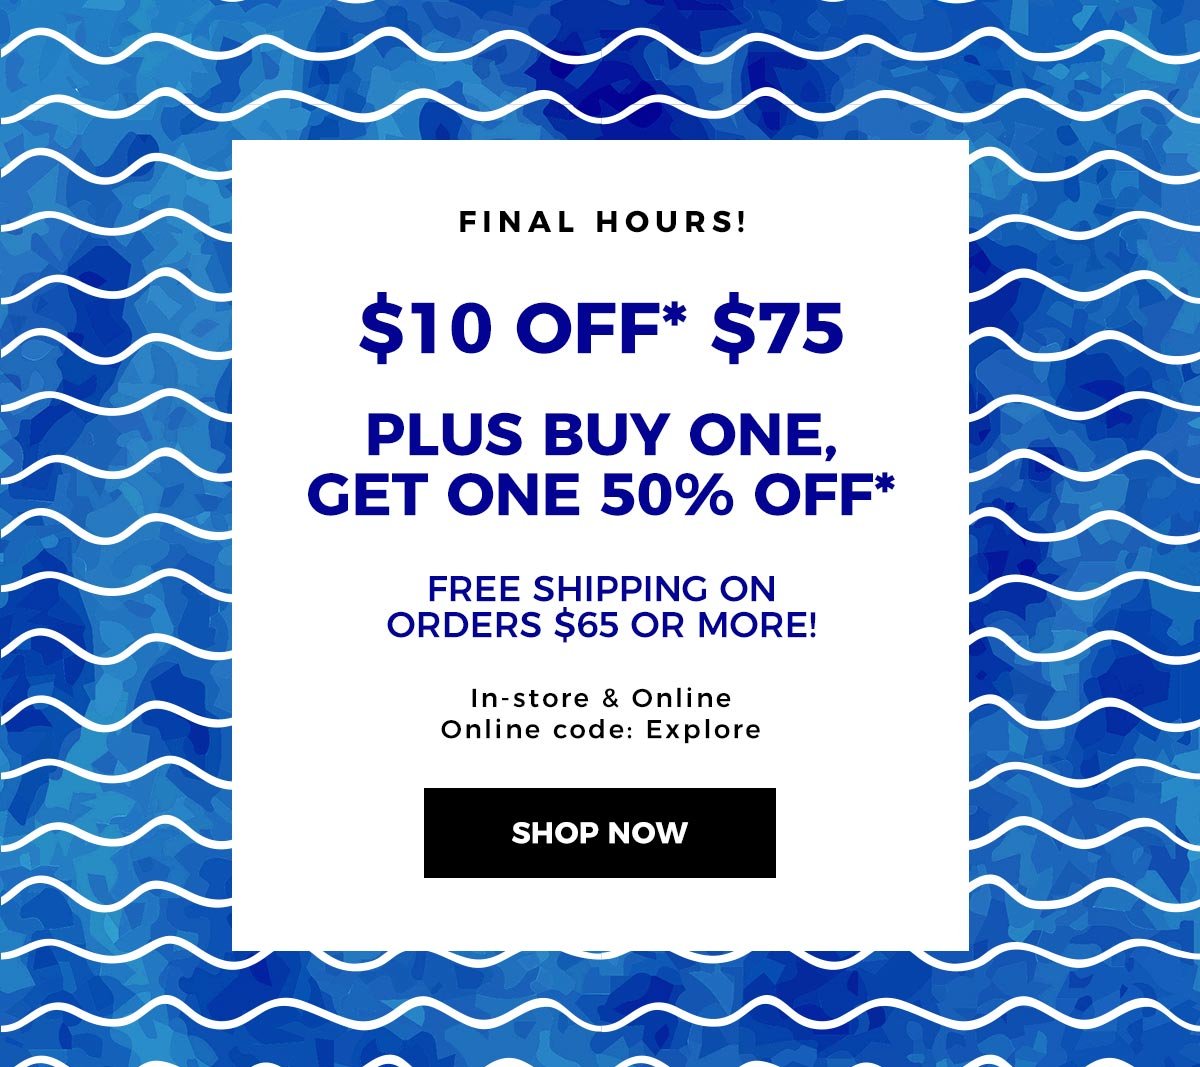 Just hours left for $10 off $75 